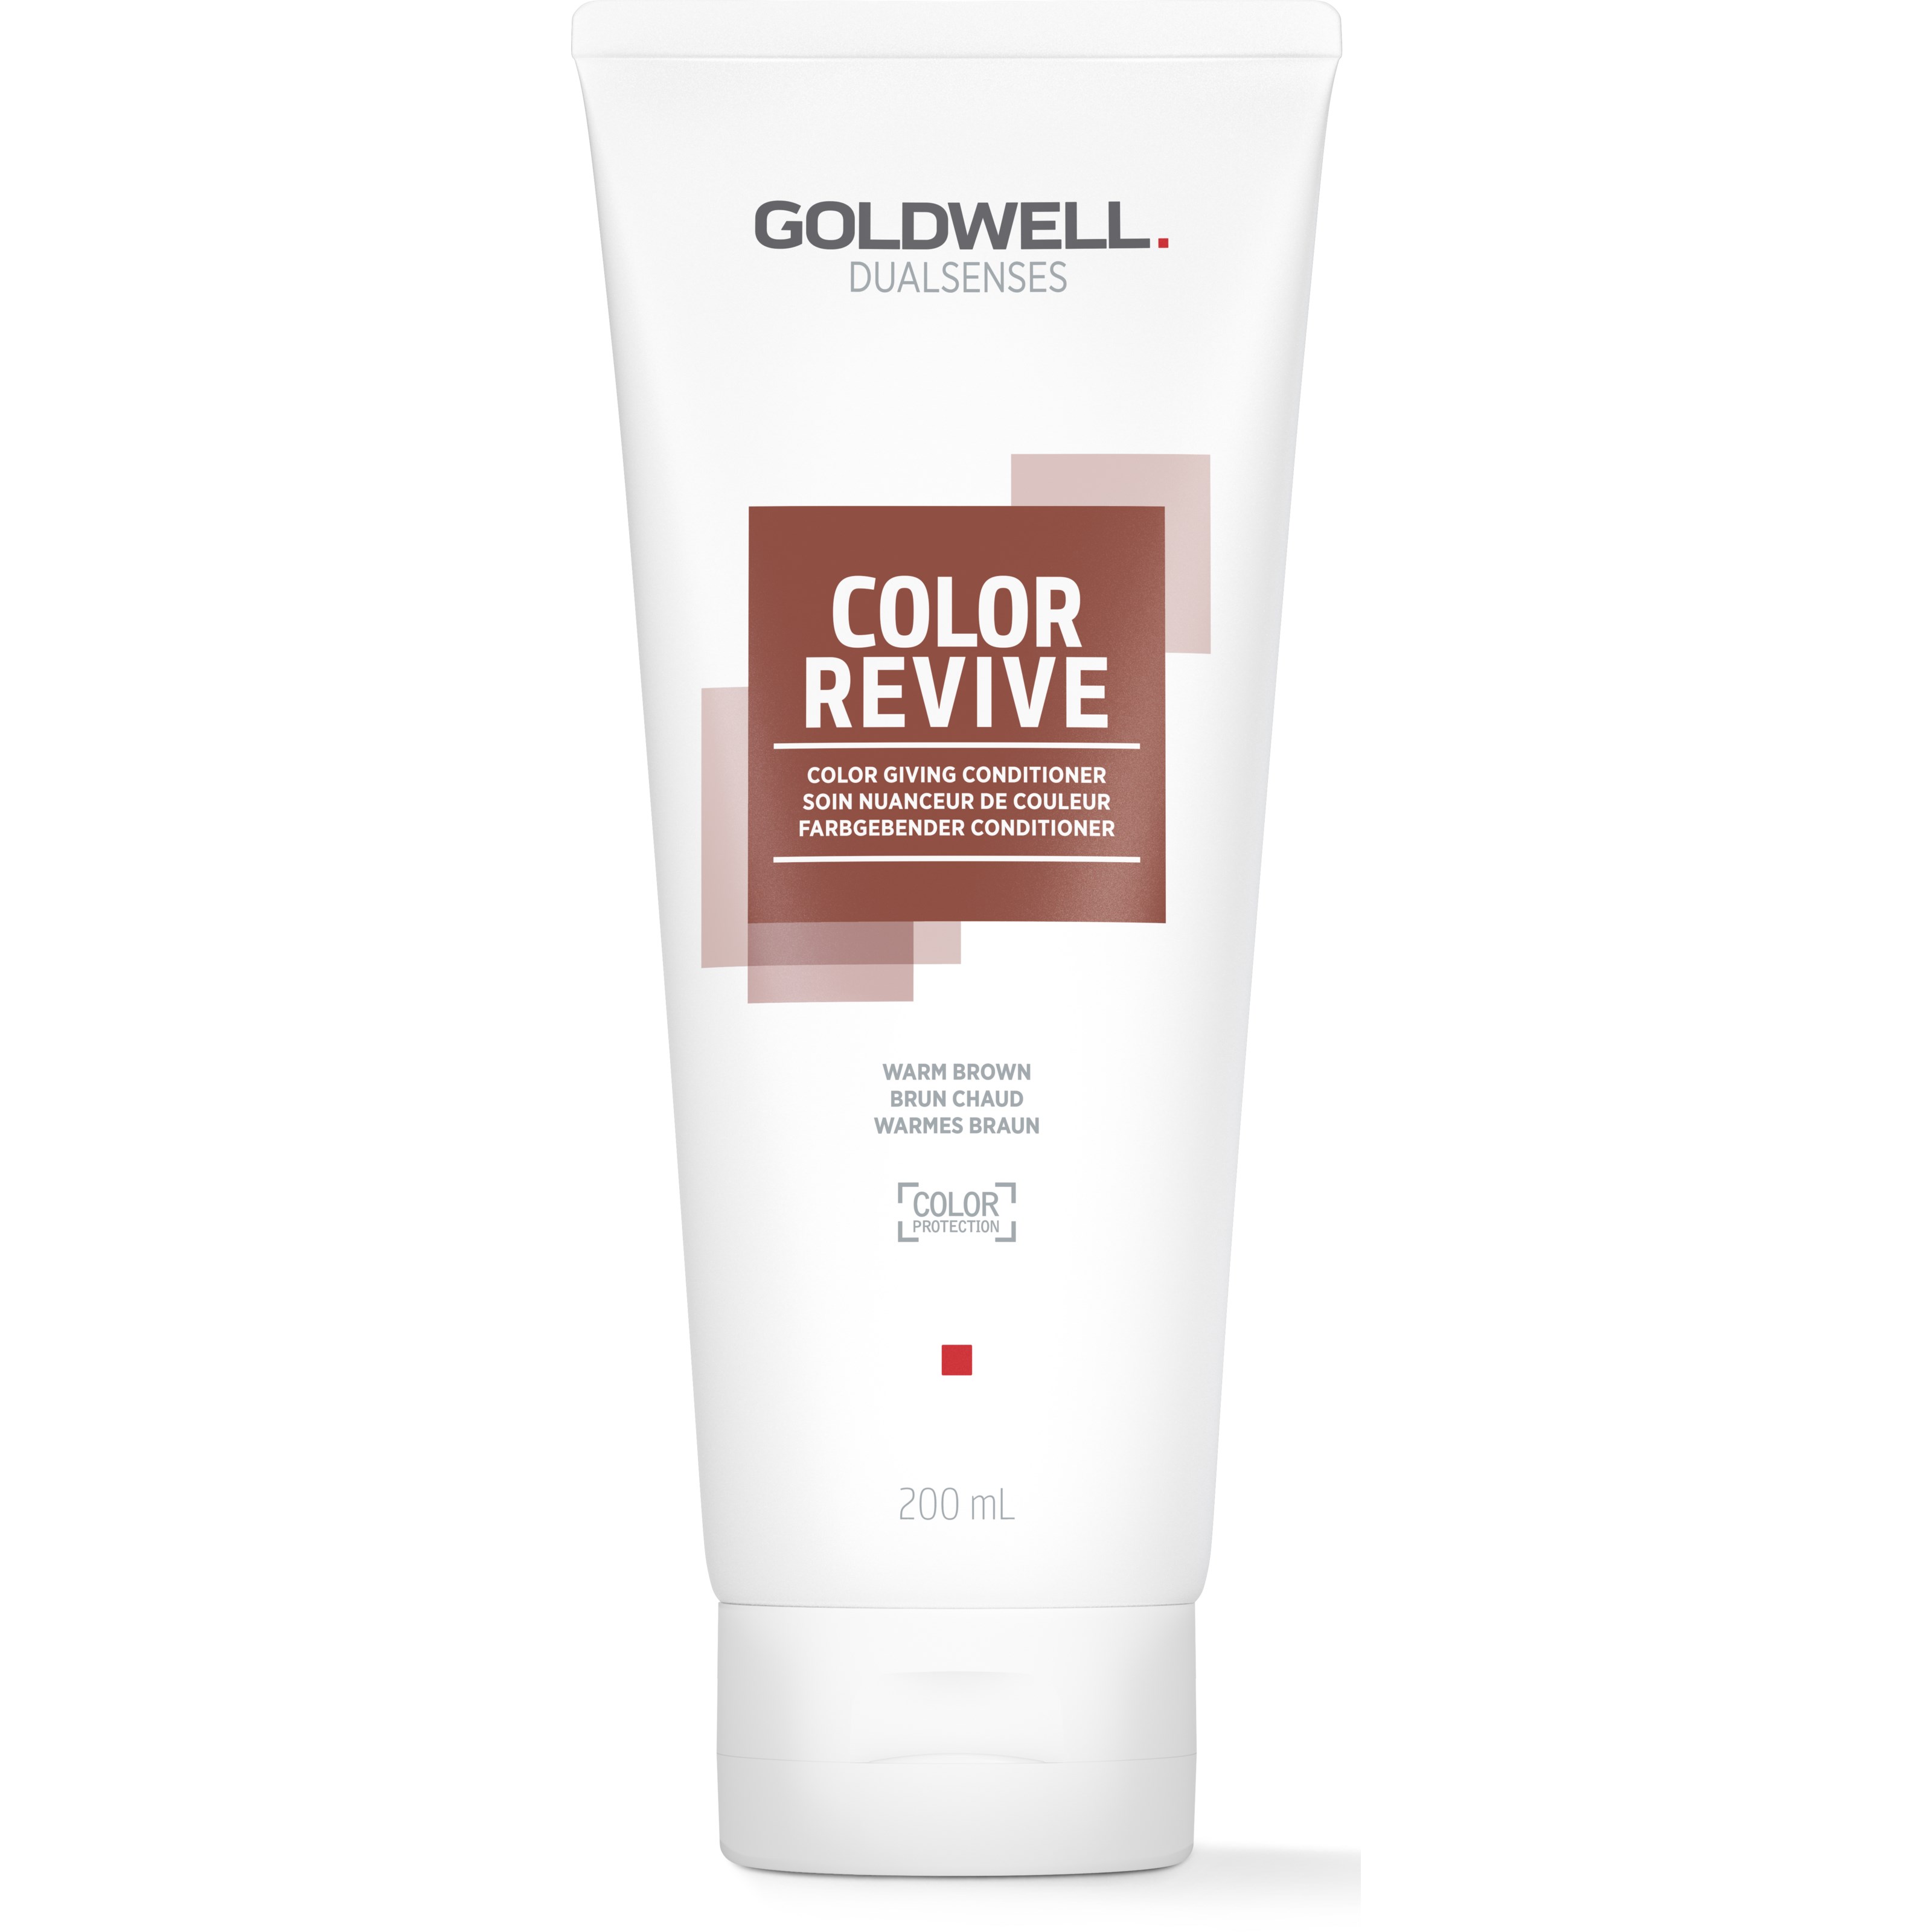 Goldwell Dualsenses Color Revive Color Giving Conditioner Warm Brown